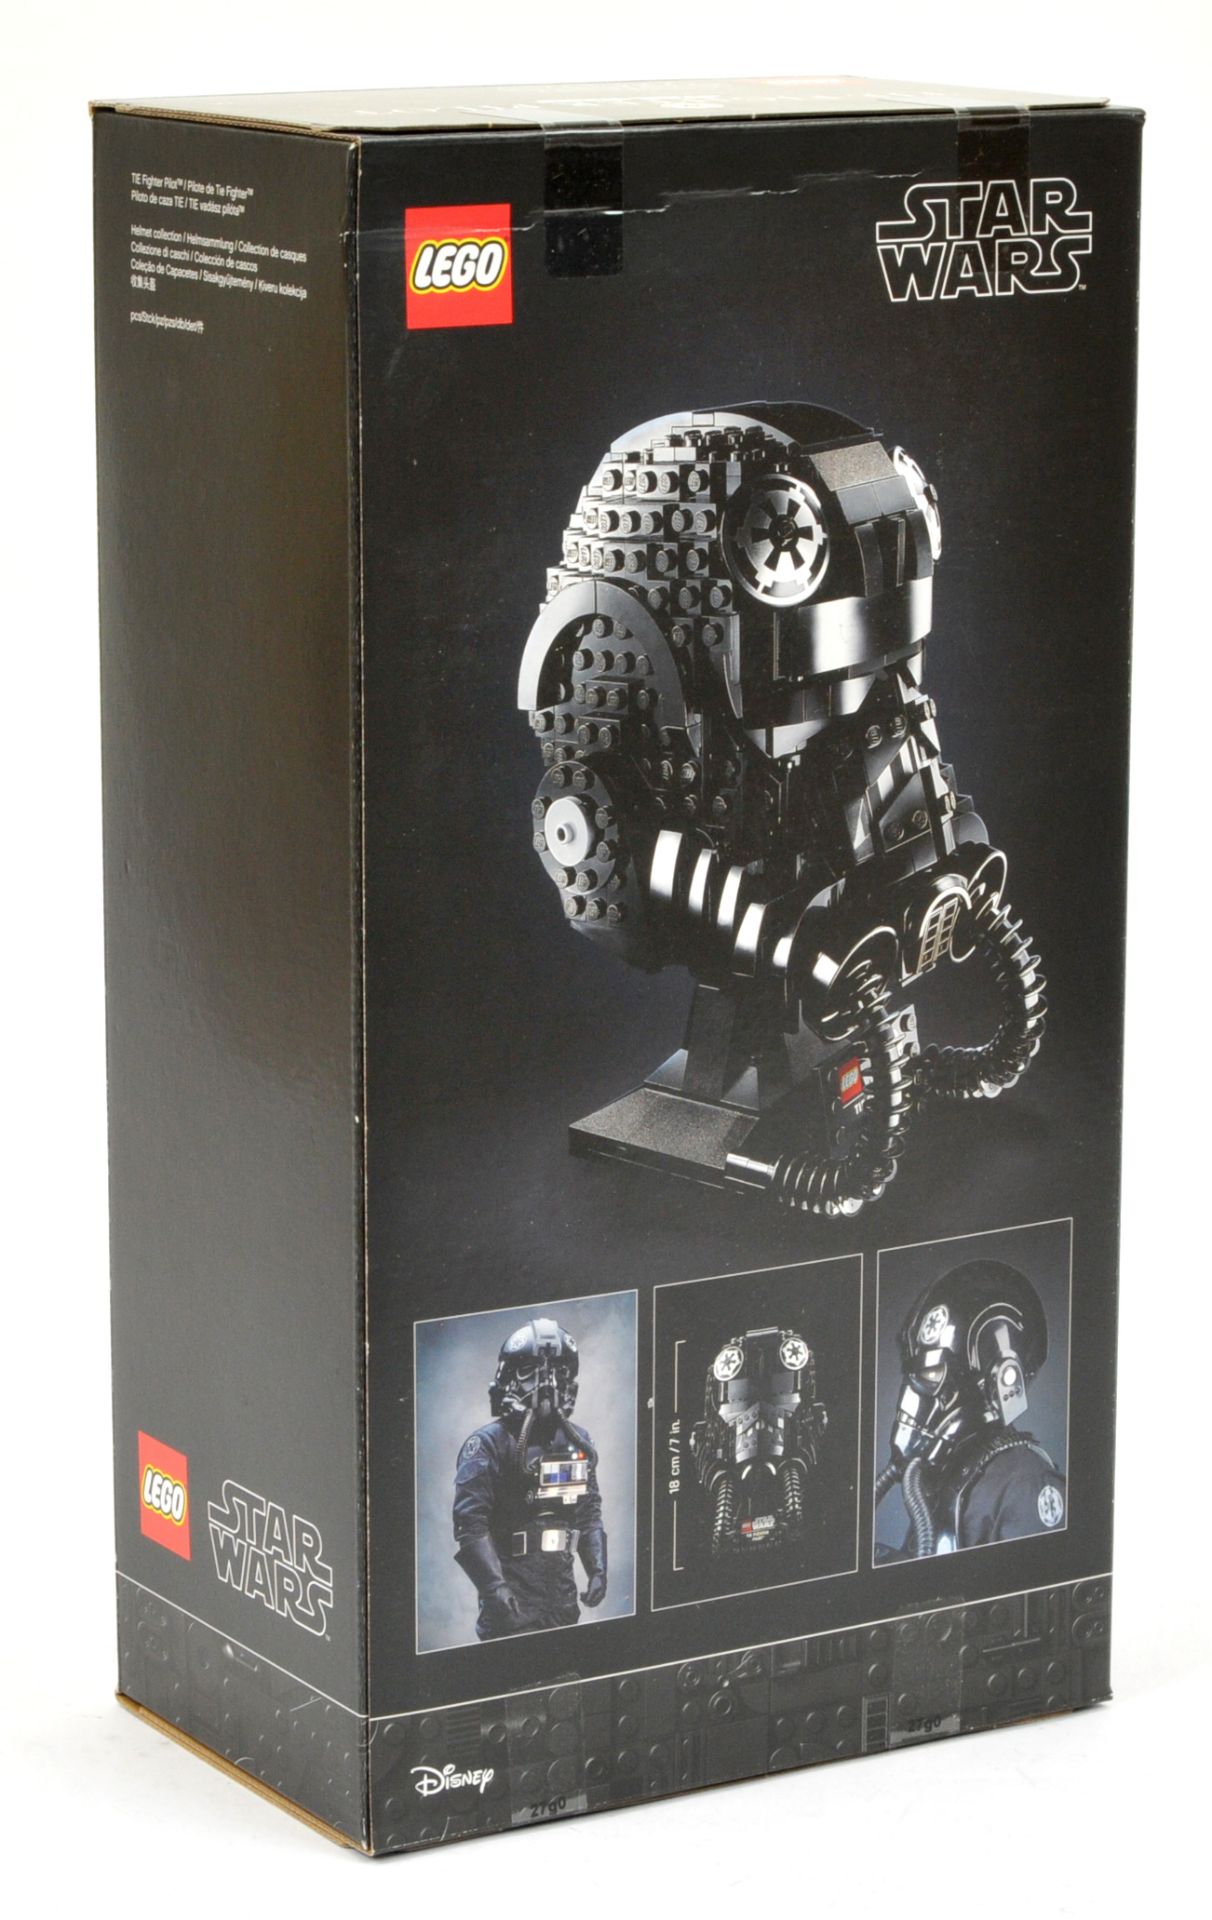 Lego Star Wars 75274 TIE Fighter Pilot Helmet, within Near Mint sealed packaging. - Image 2 of 2